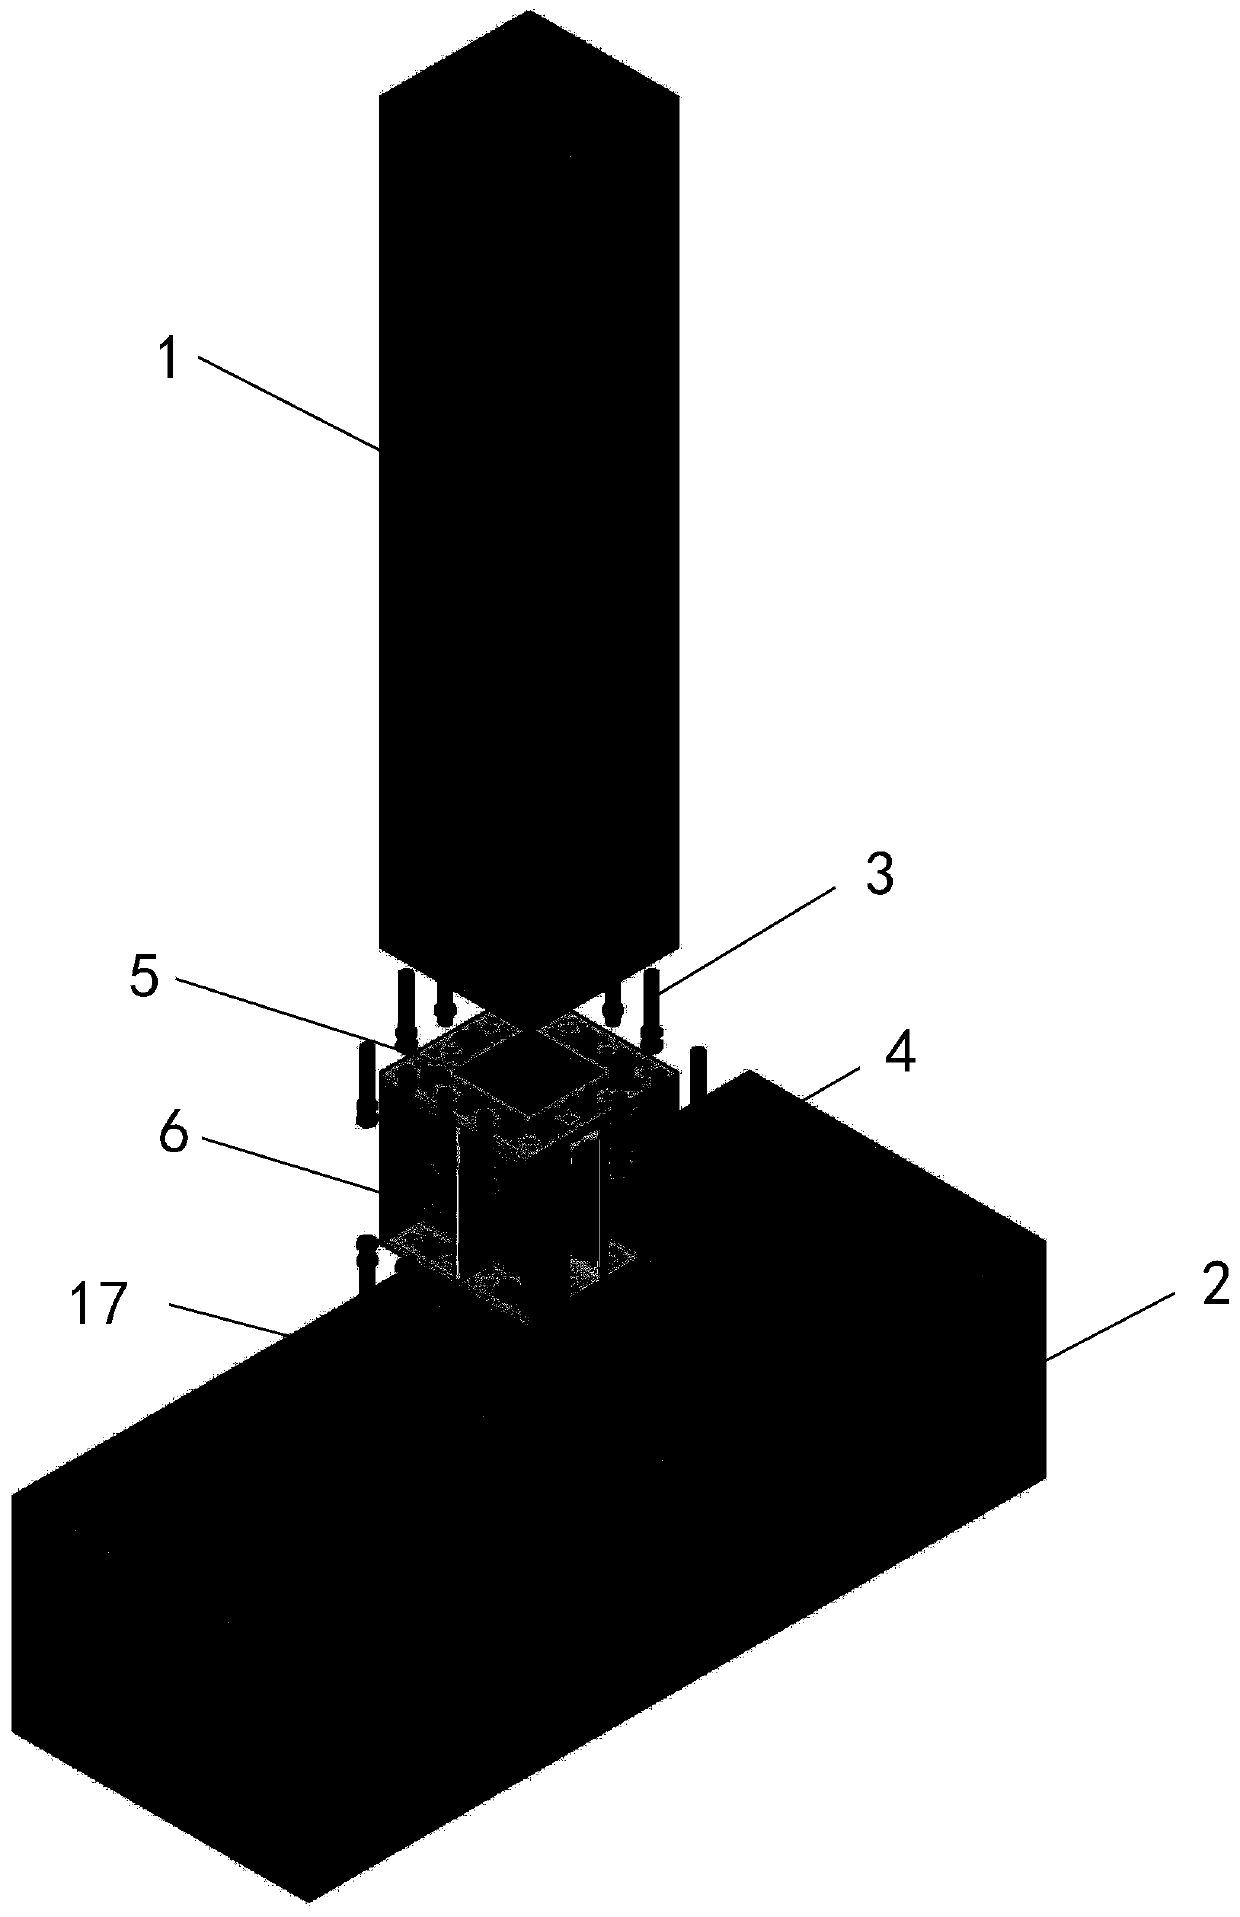 A connection method between a detachable assembled column and a ductile node of the foundation